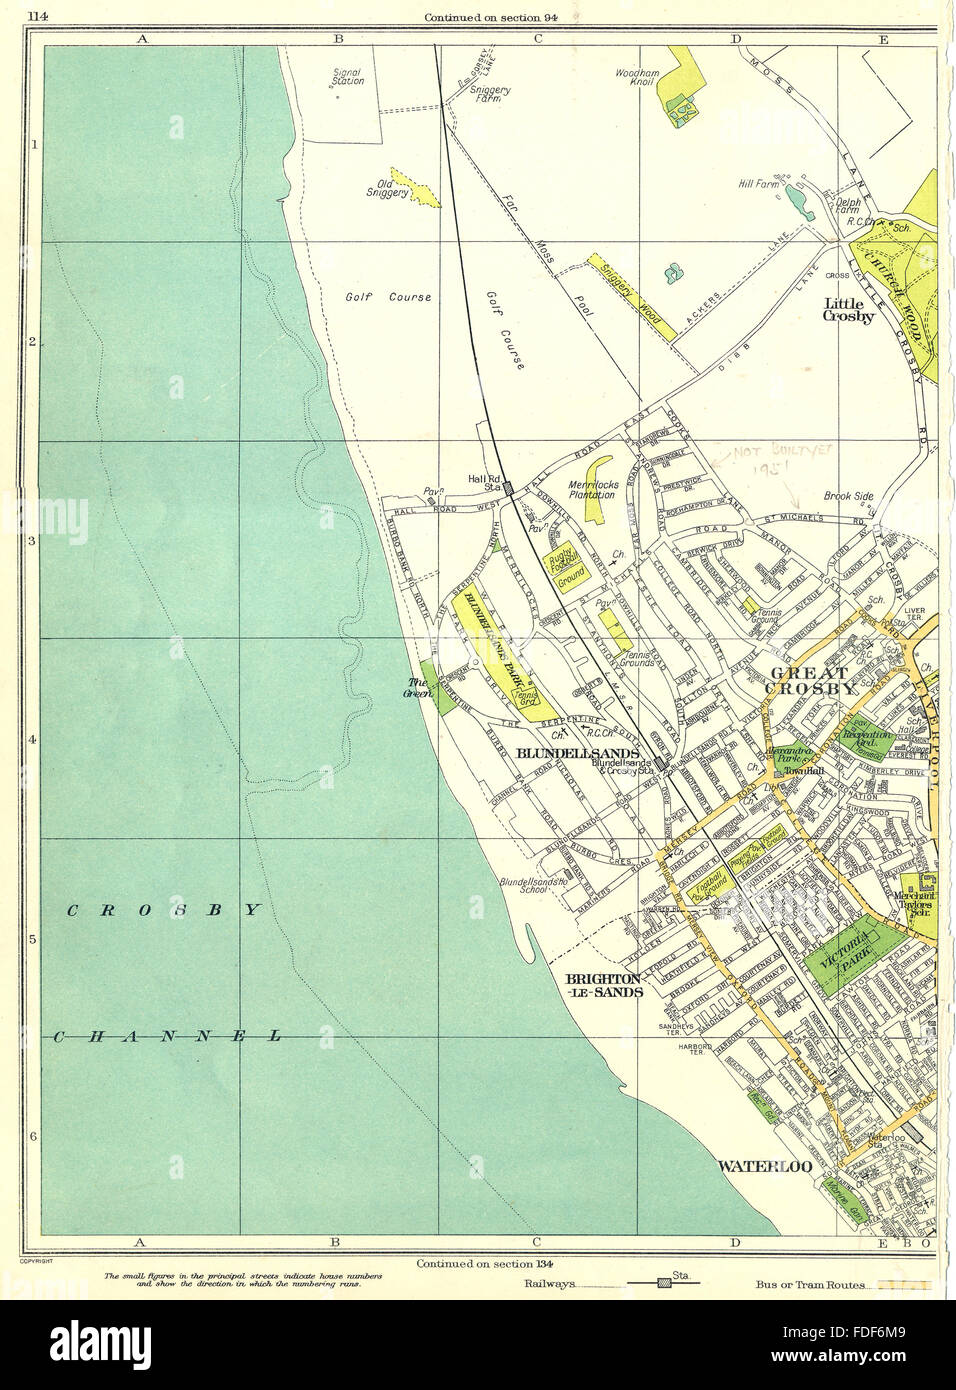 LIVERPOOL Great Crosby Blundellsands Waterloo Little Brighton-le-Sands 1935 map Stock Photo